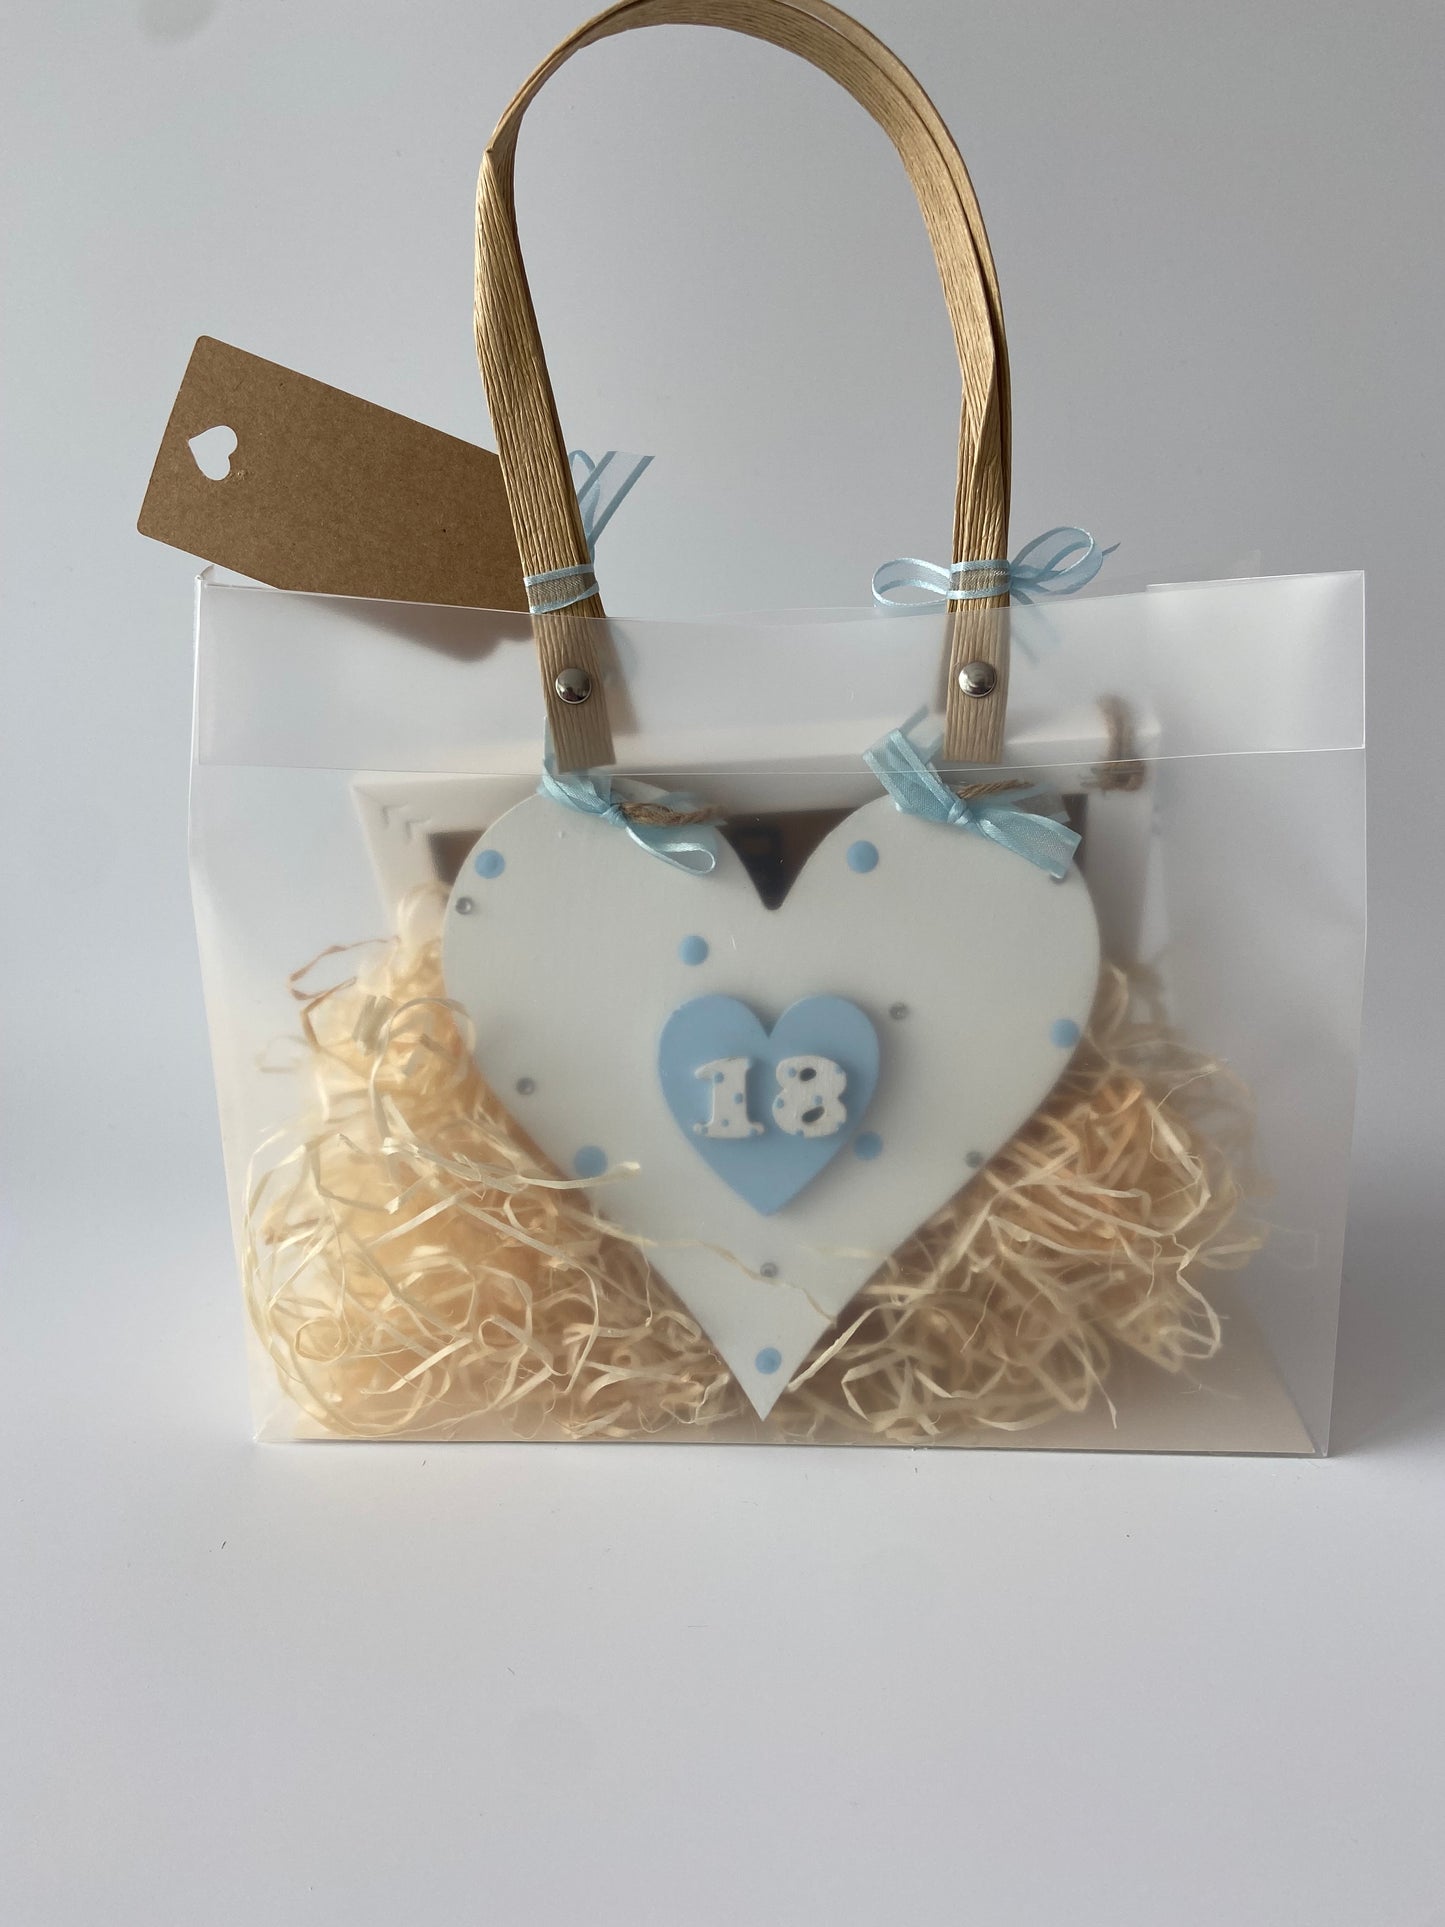 Image shows an 18th birthday plaque included in gift hamper, comes decorated with polka dots, gems and ribbon